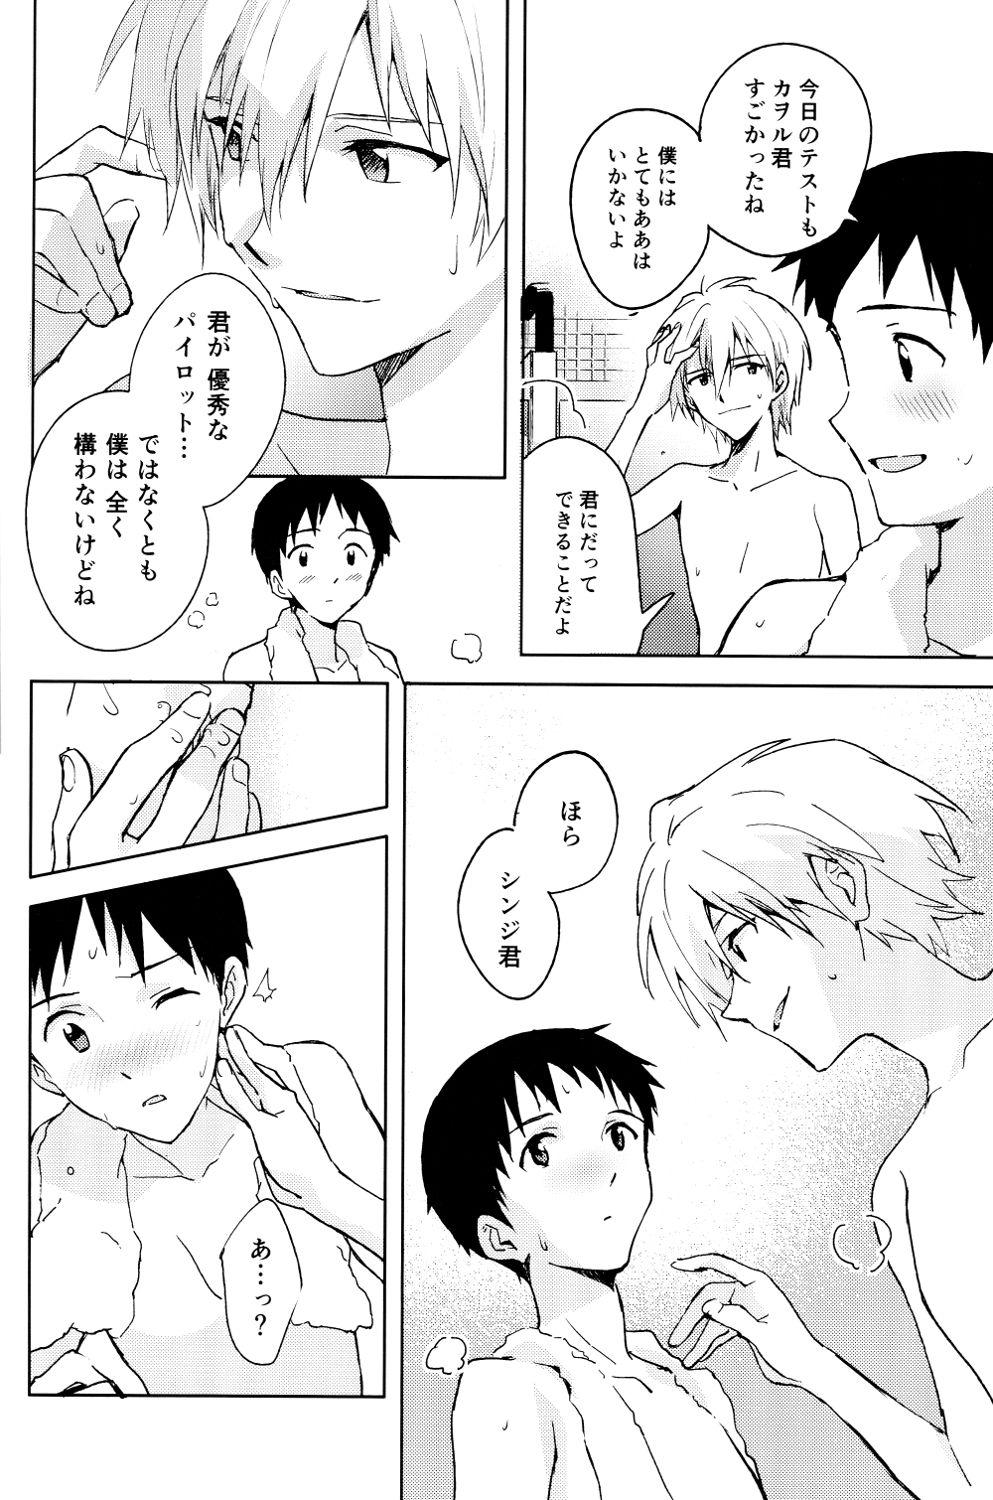 Free FLY ME TO THE MOON - Neon genesis evangelion Ftv Girls - Page 12